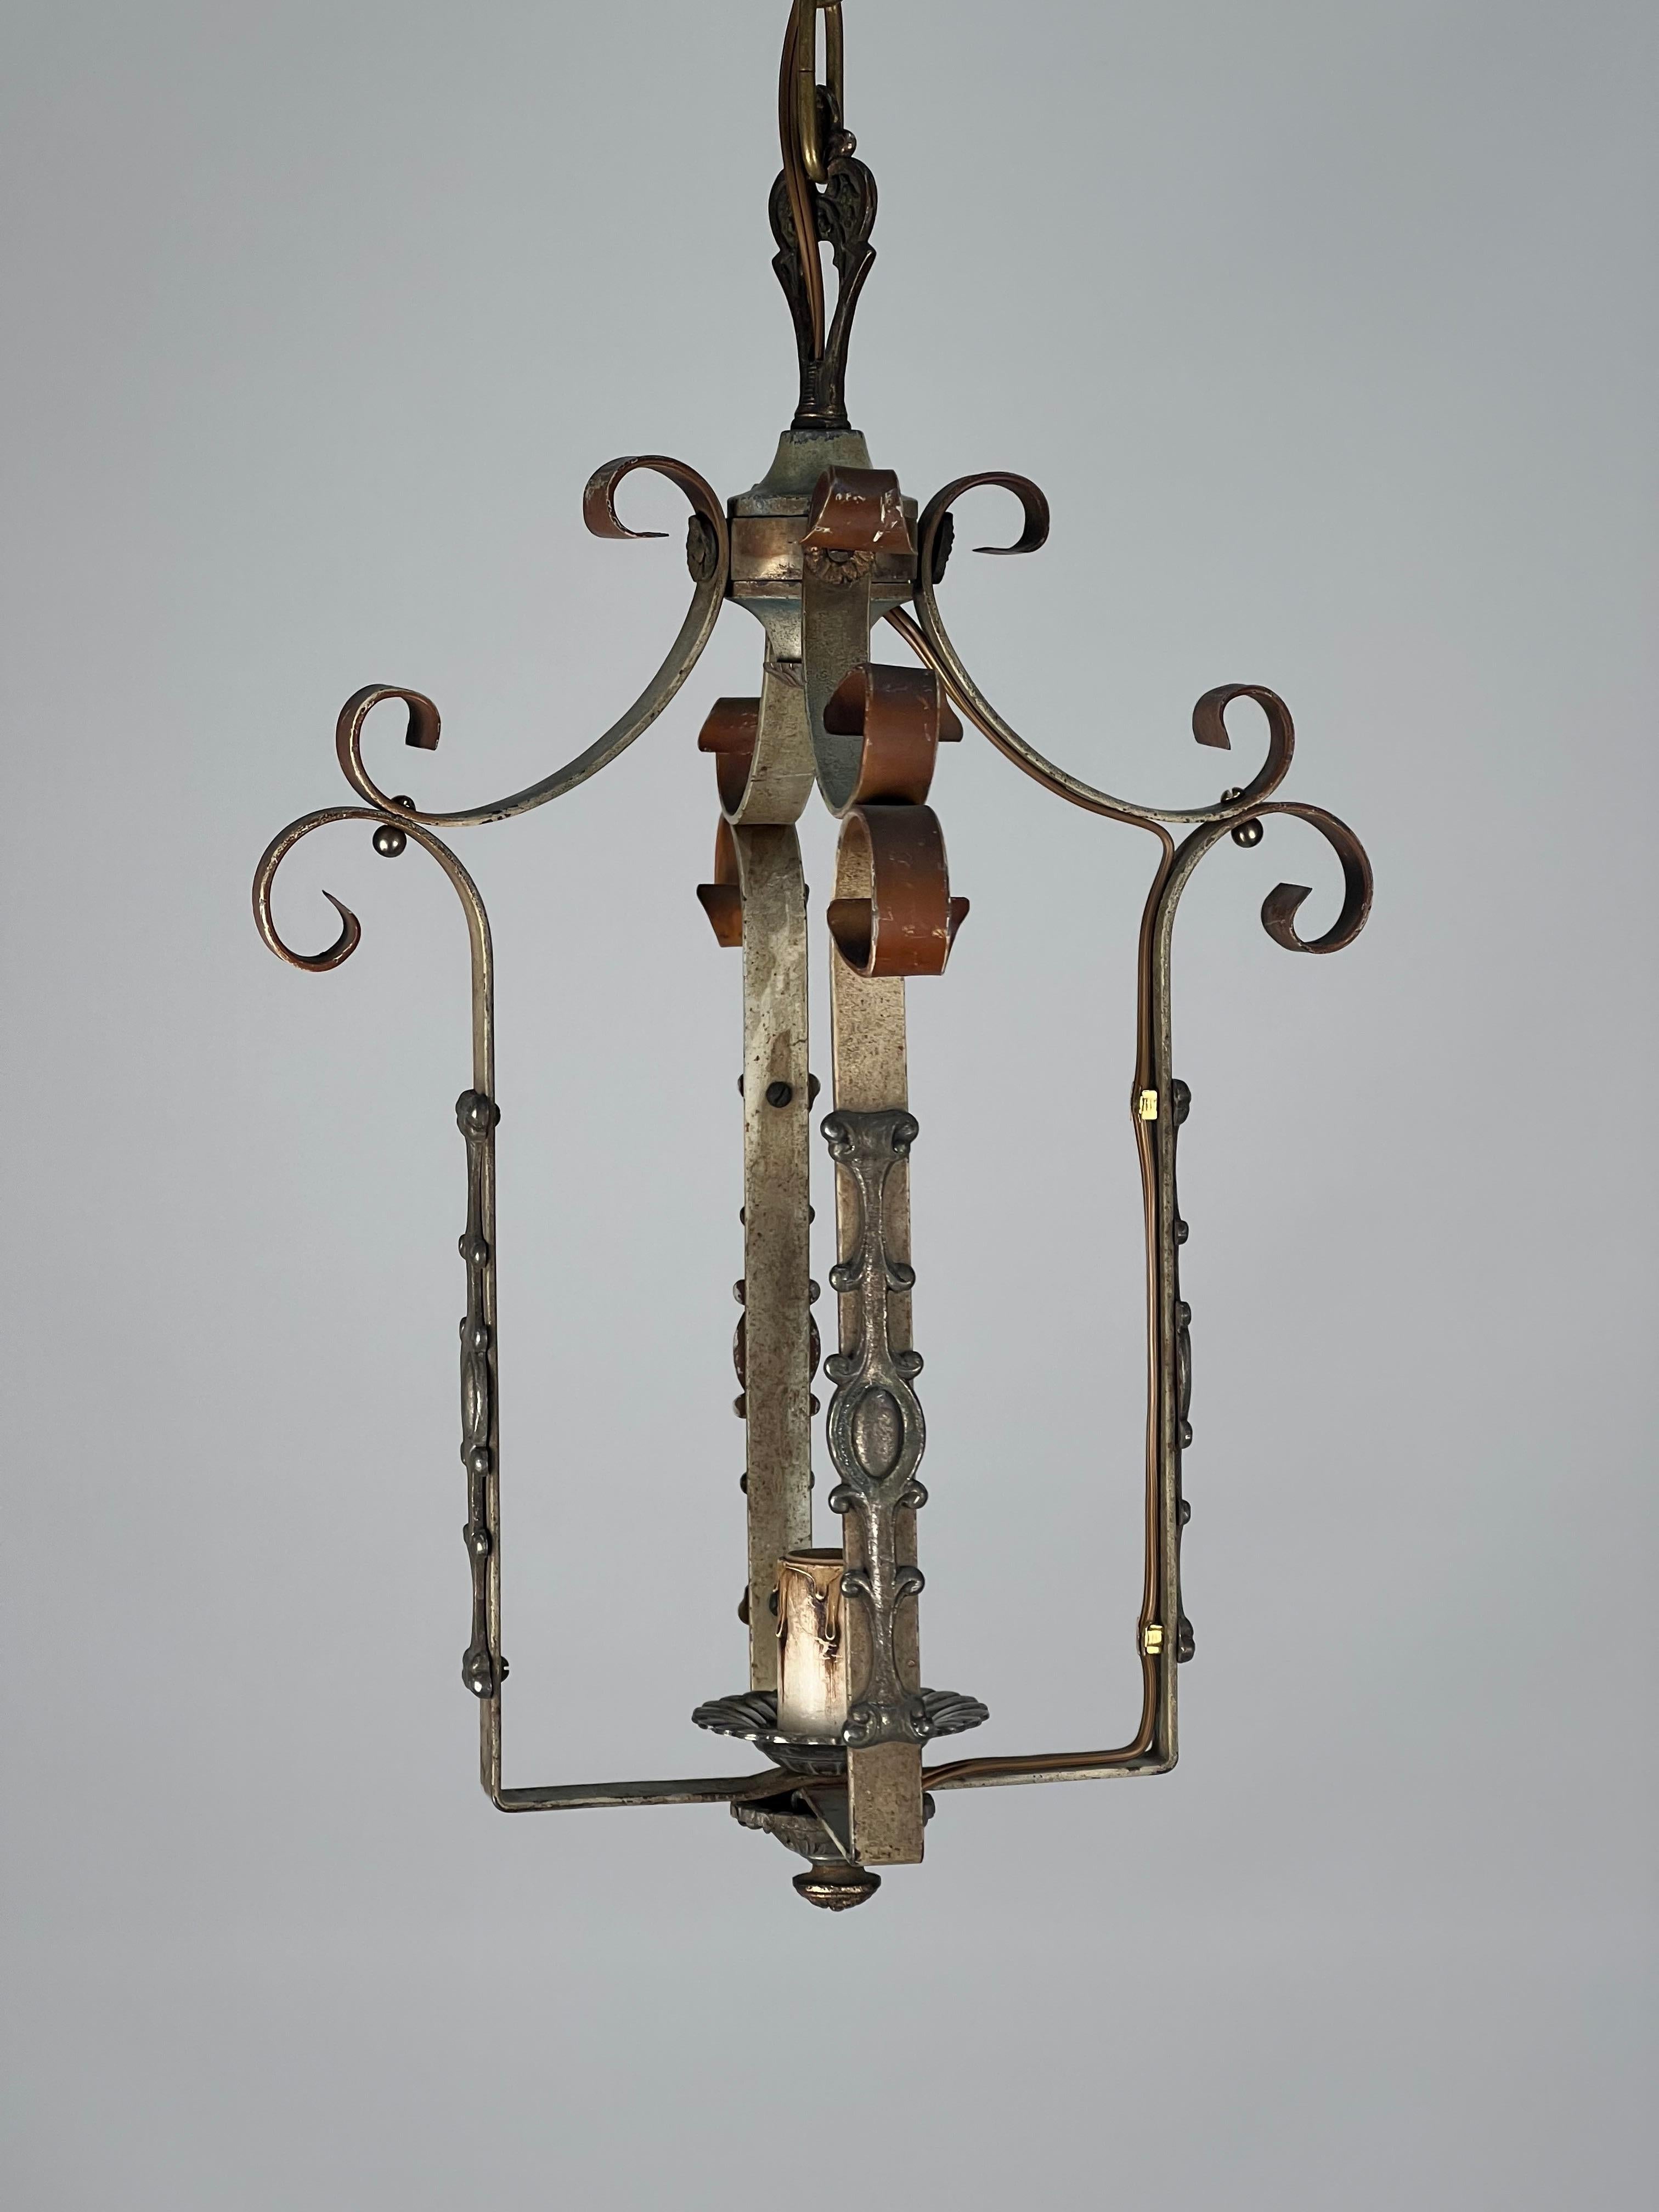 1920's American open lantern featuring suggestions of Tudor revival scrolls and shield appliques. 

A central single medium base socket illuminates each of the four strap arms. We have chosen to leave the finish and patina as is because of its